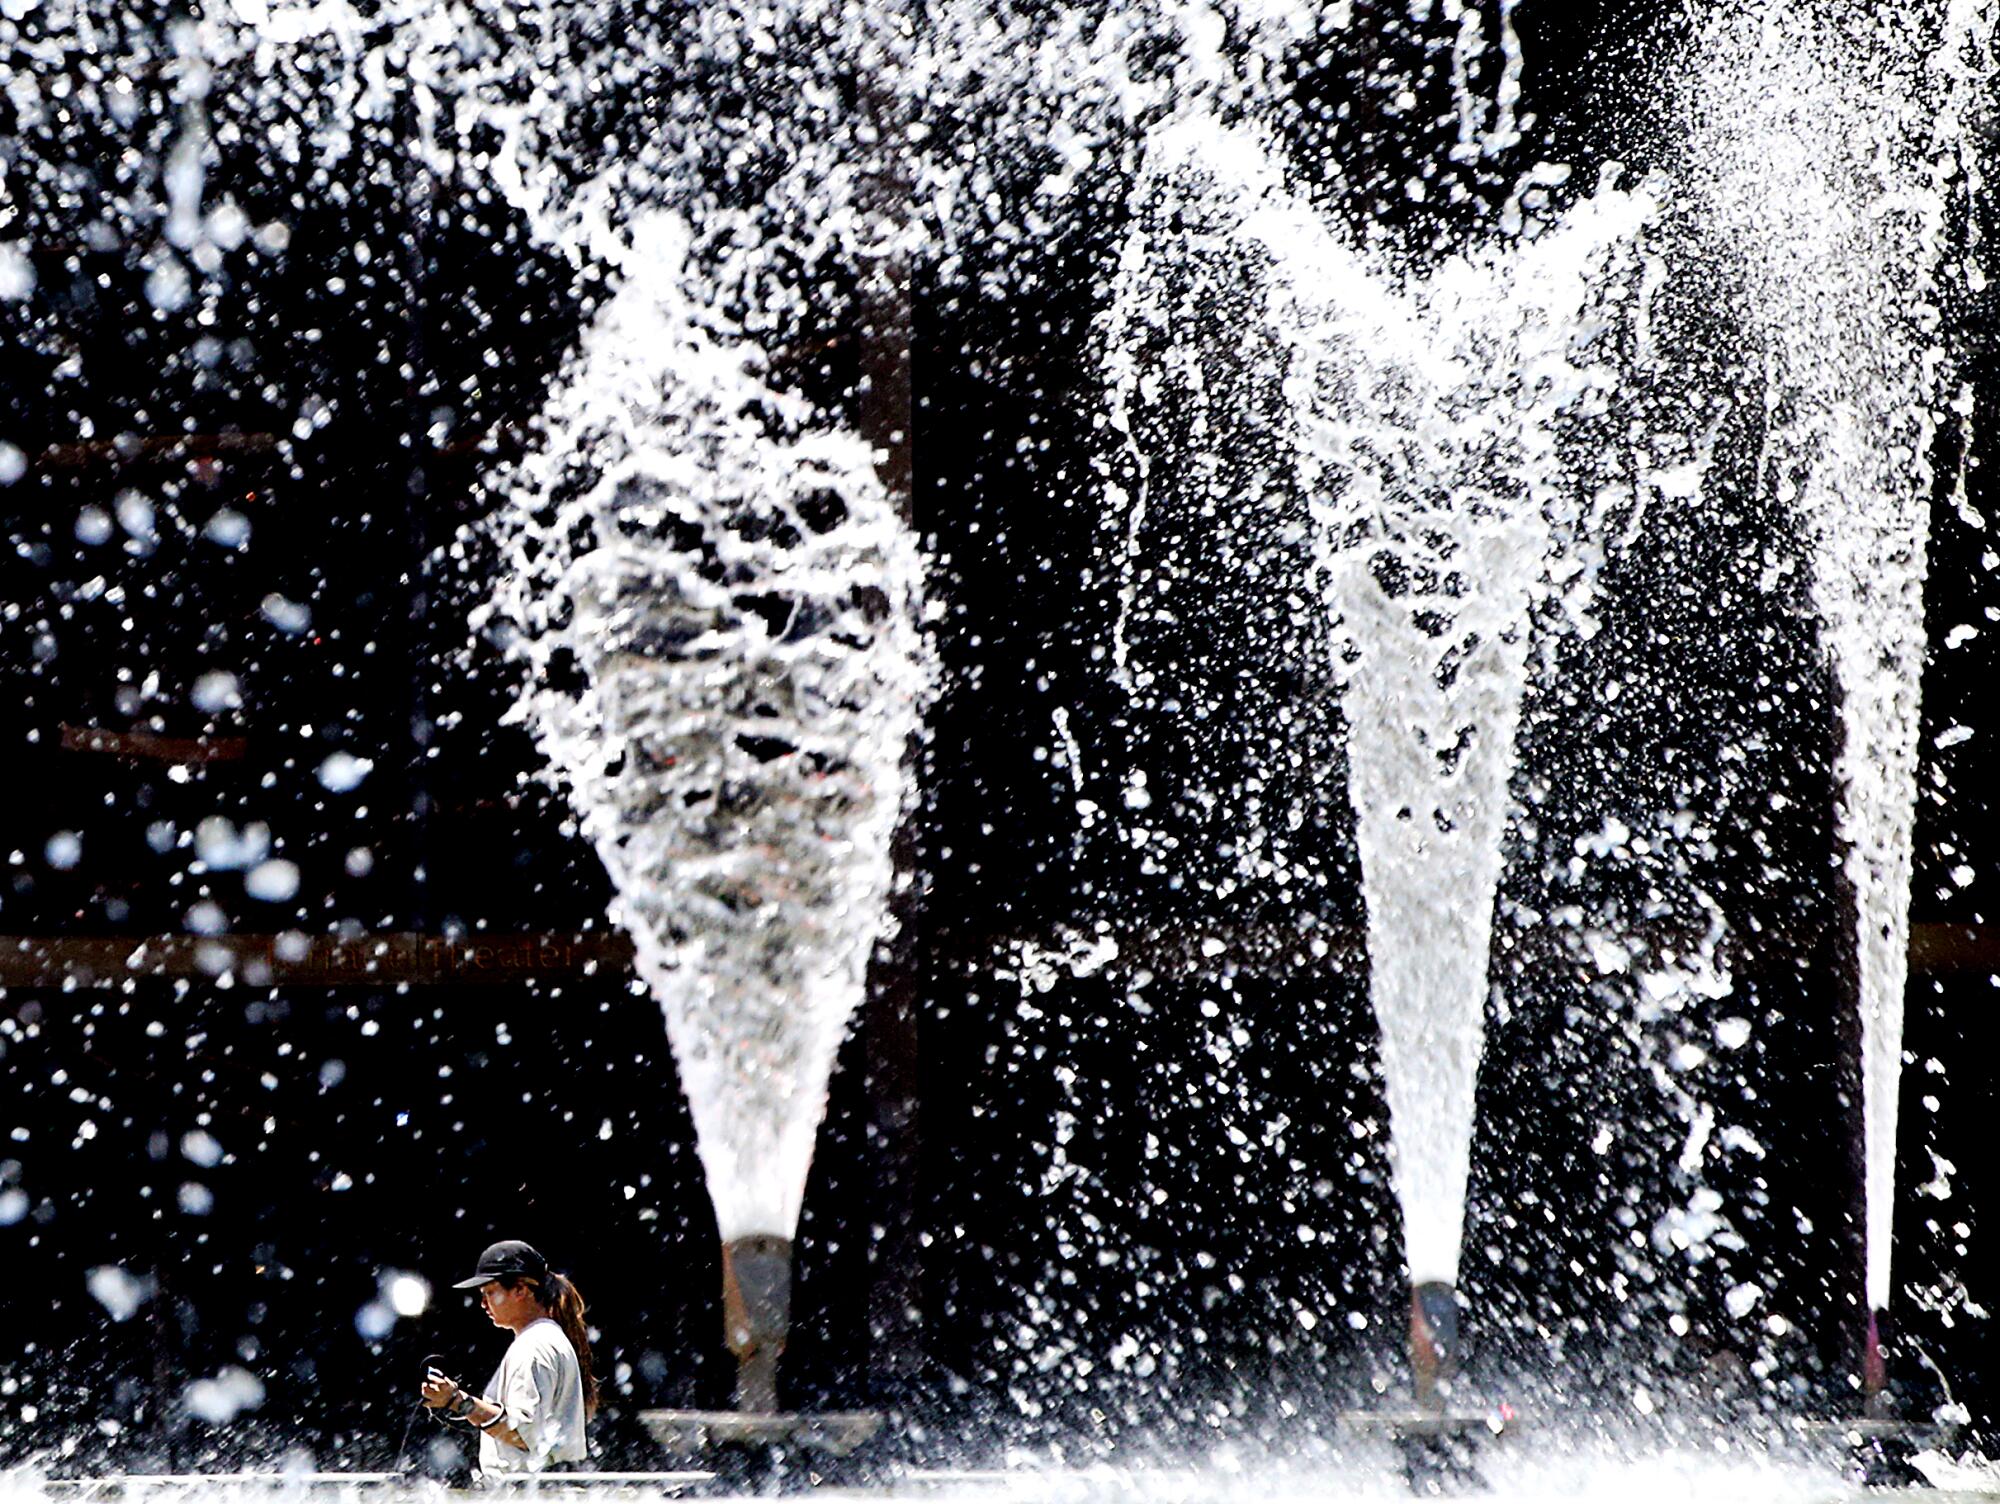 Splashing water fountains mist the area around the Long Beach Performing Arts Center Plaza.